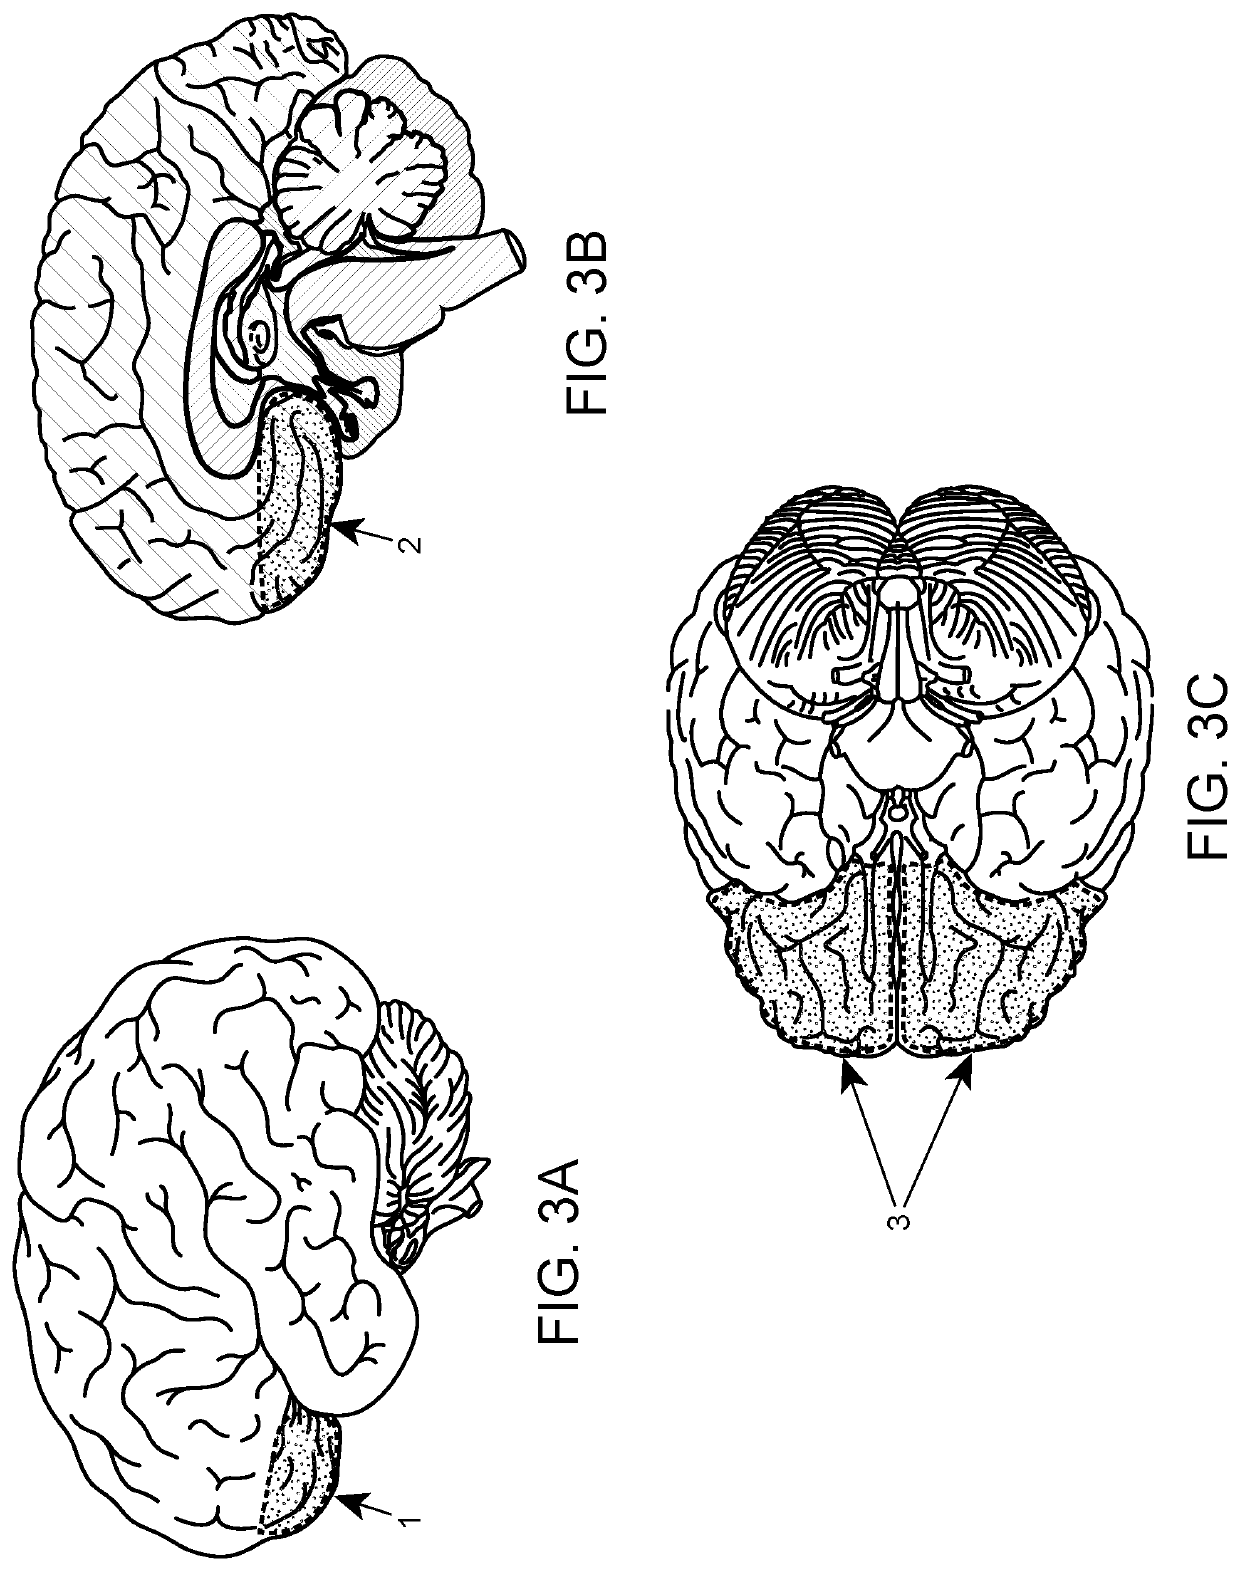 Method of neural Intervention for the Treatment of Affective Neuropsychiatric Disorders